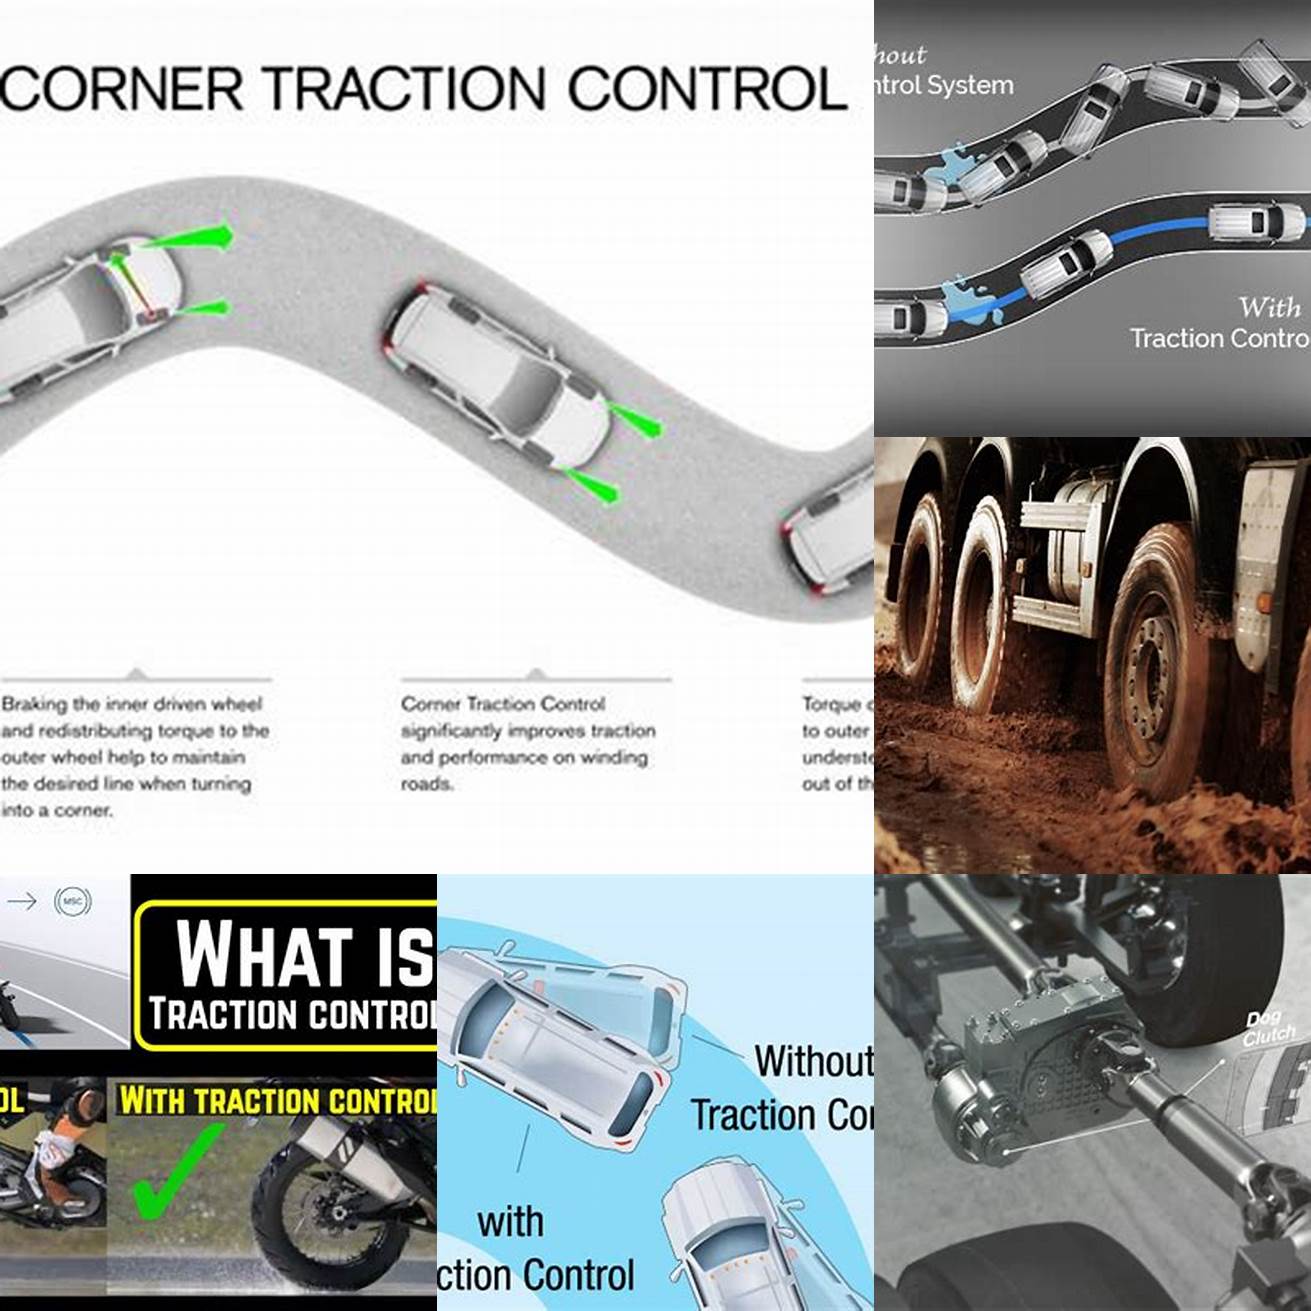 Automatic Traction Control ATC for improved traction and fuel efficiency